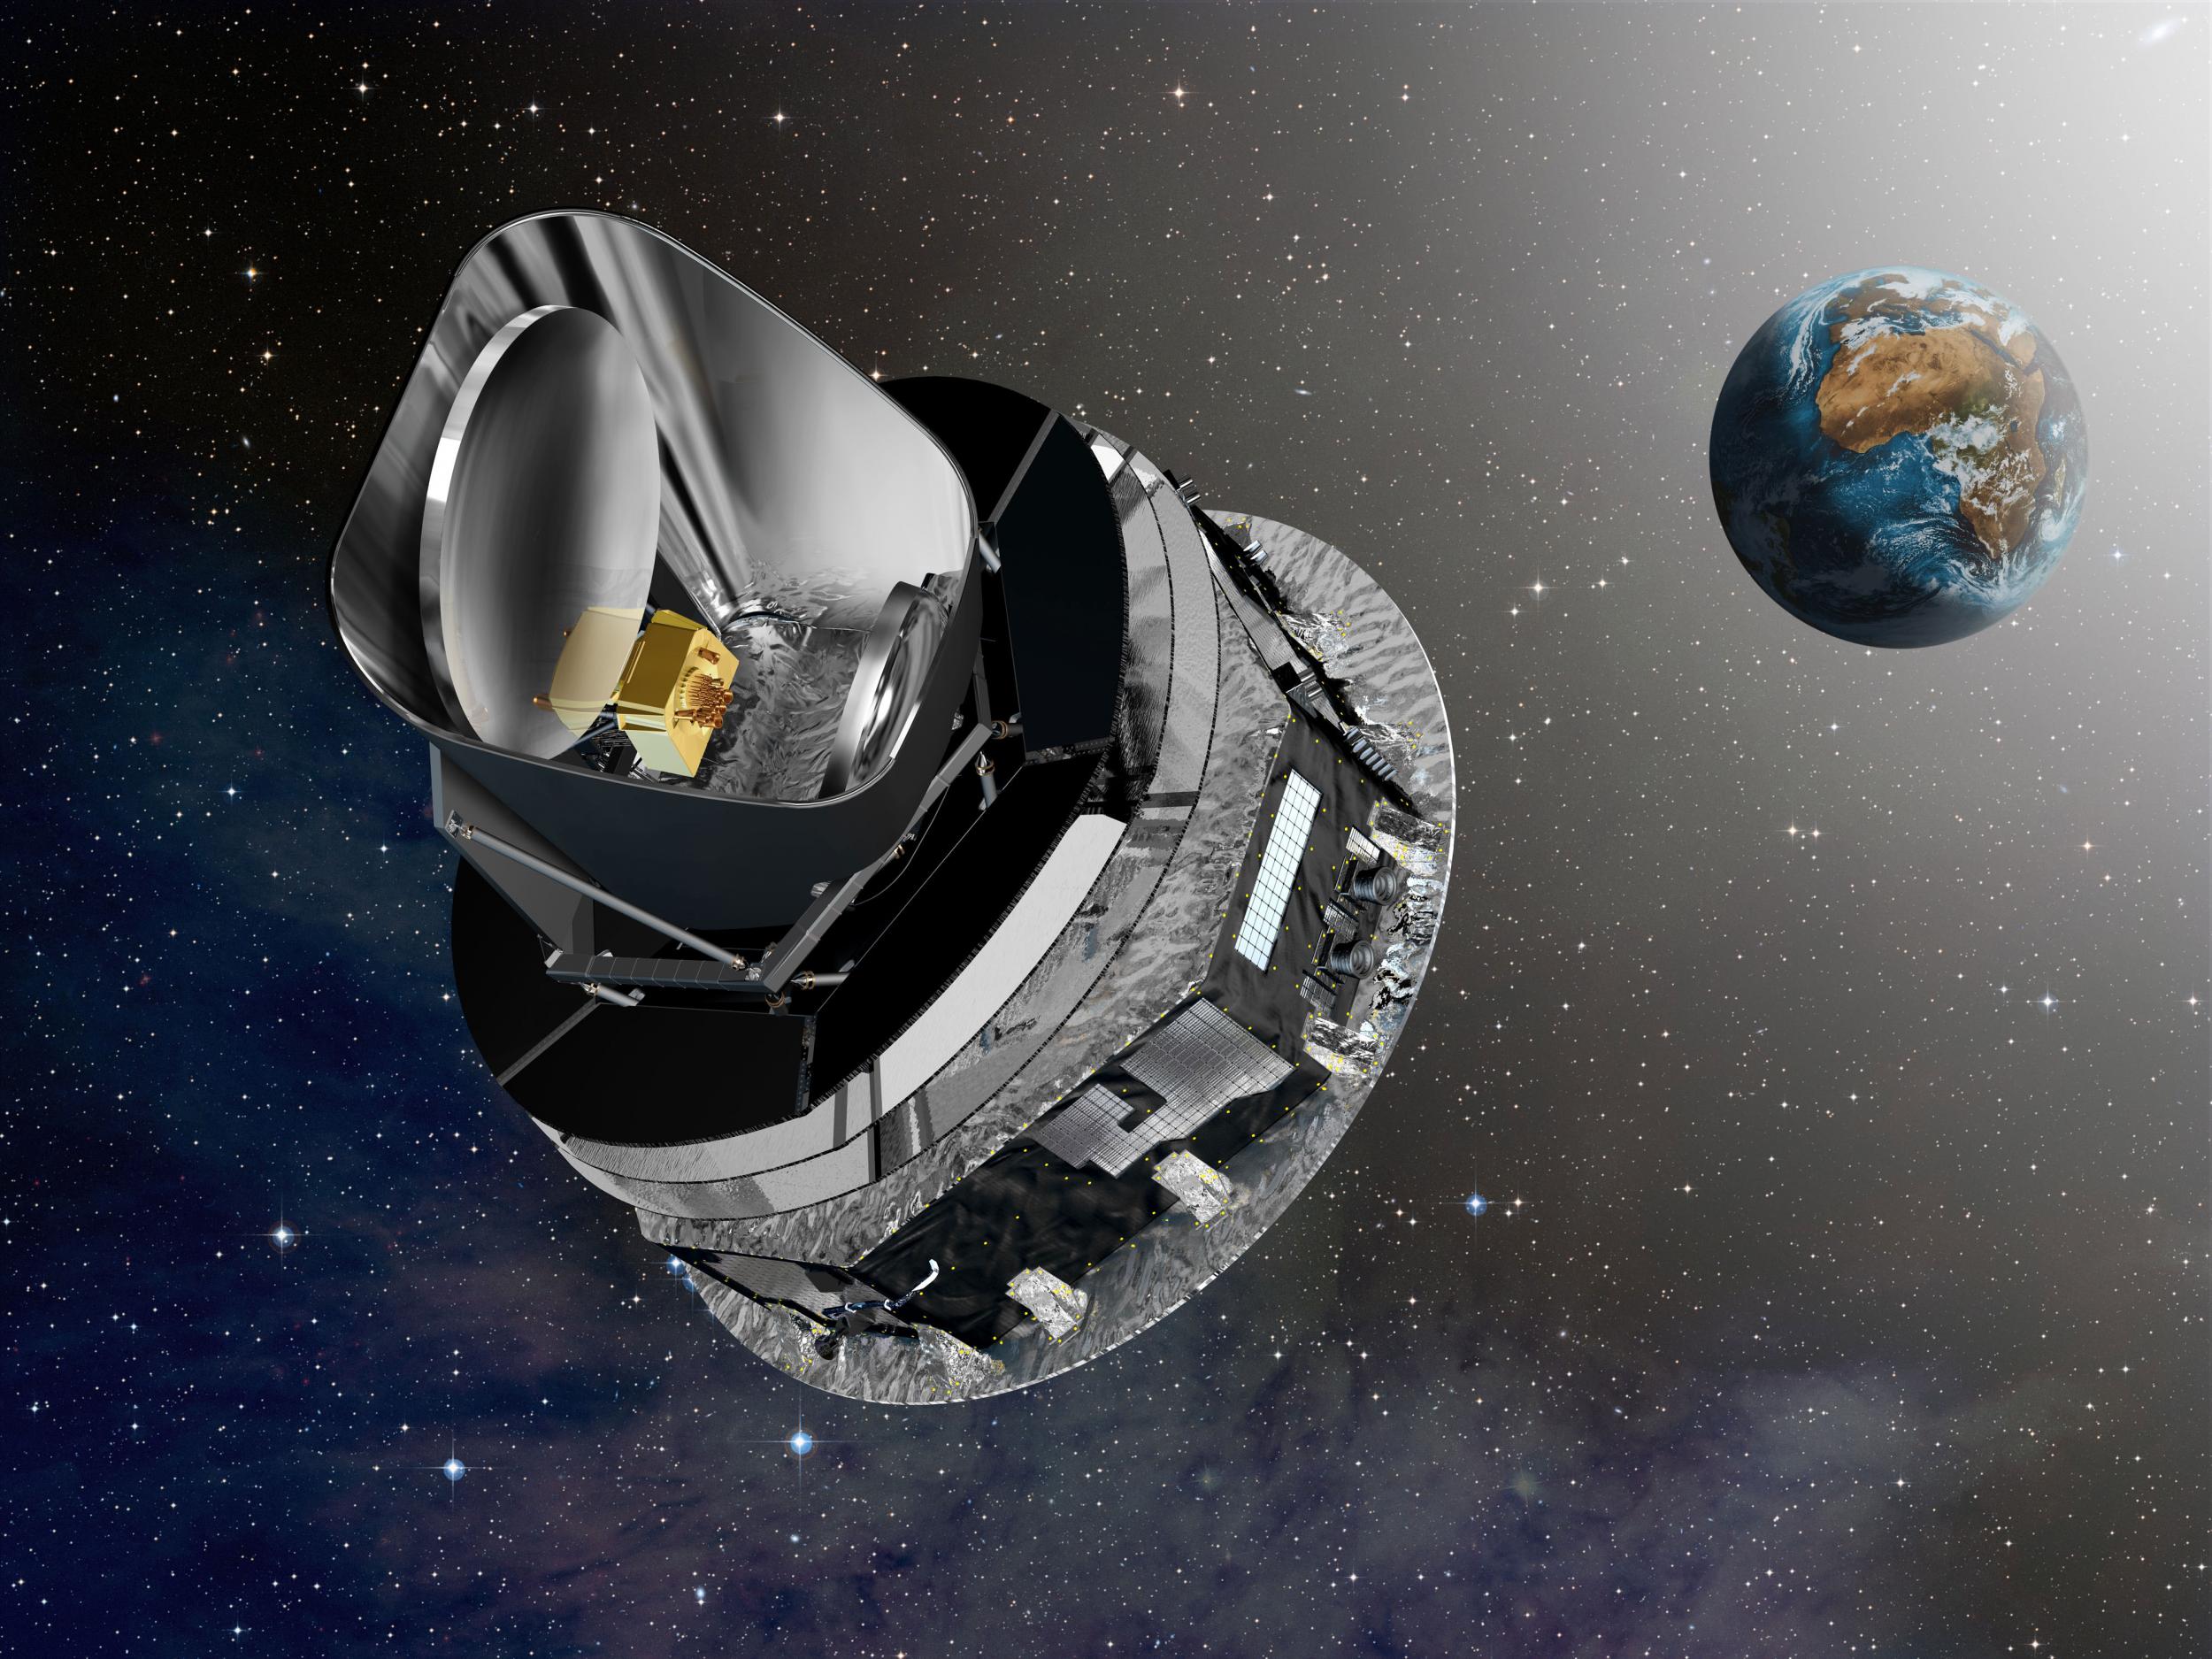 Artist's conception of the European Space Agency's (ESA's) Planck observatory cruising to its orbit